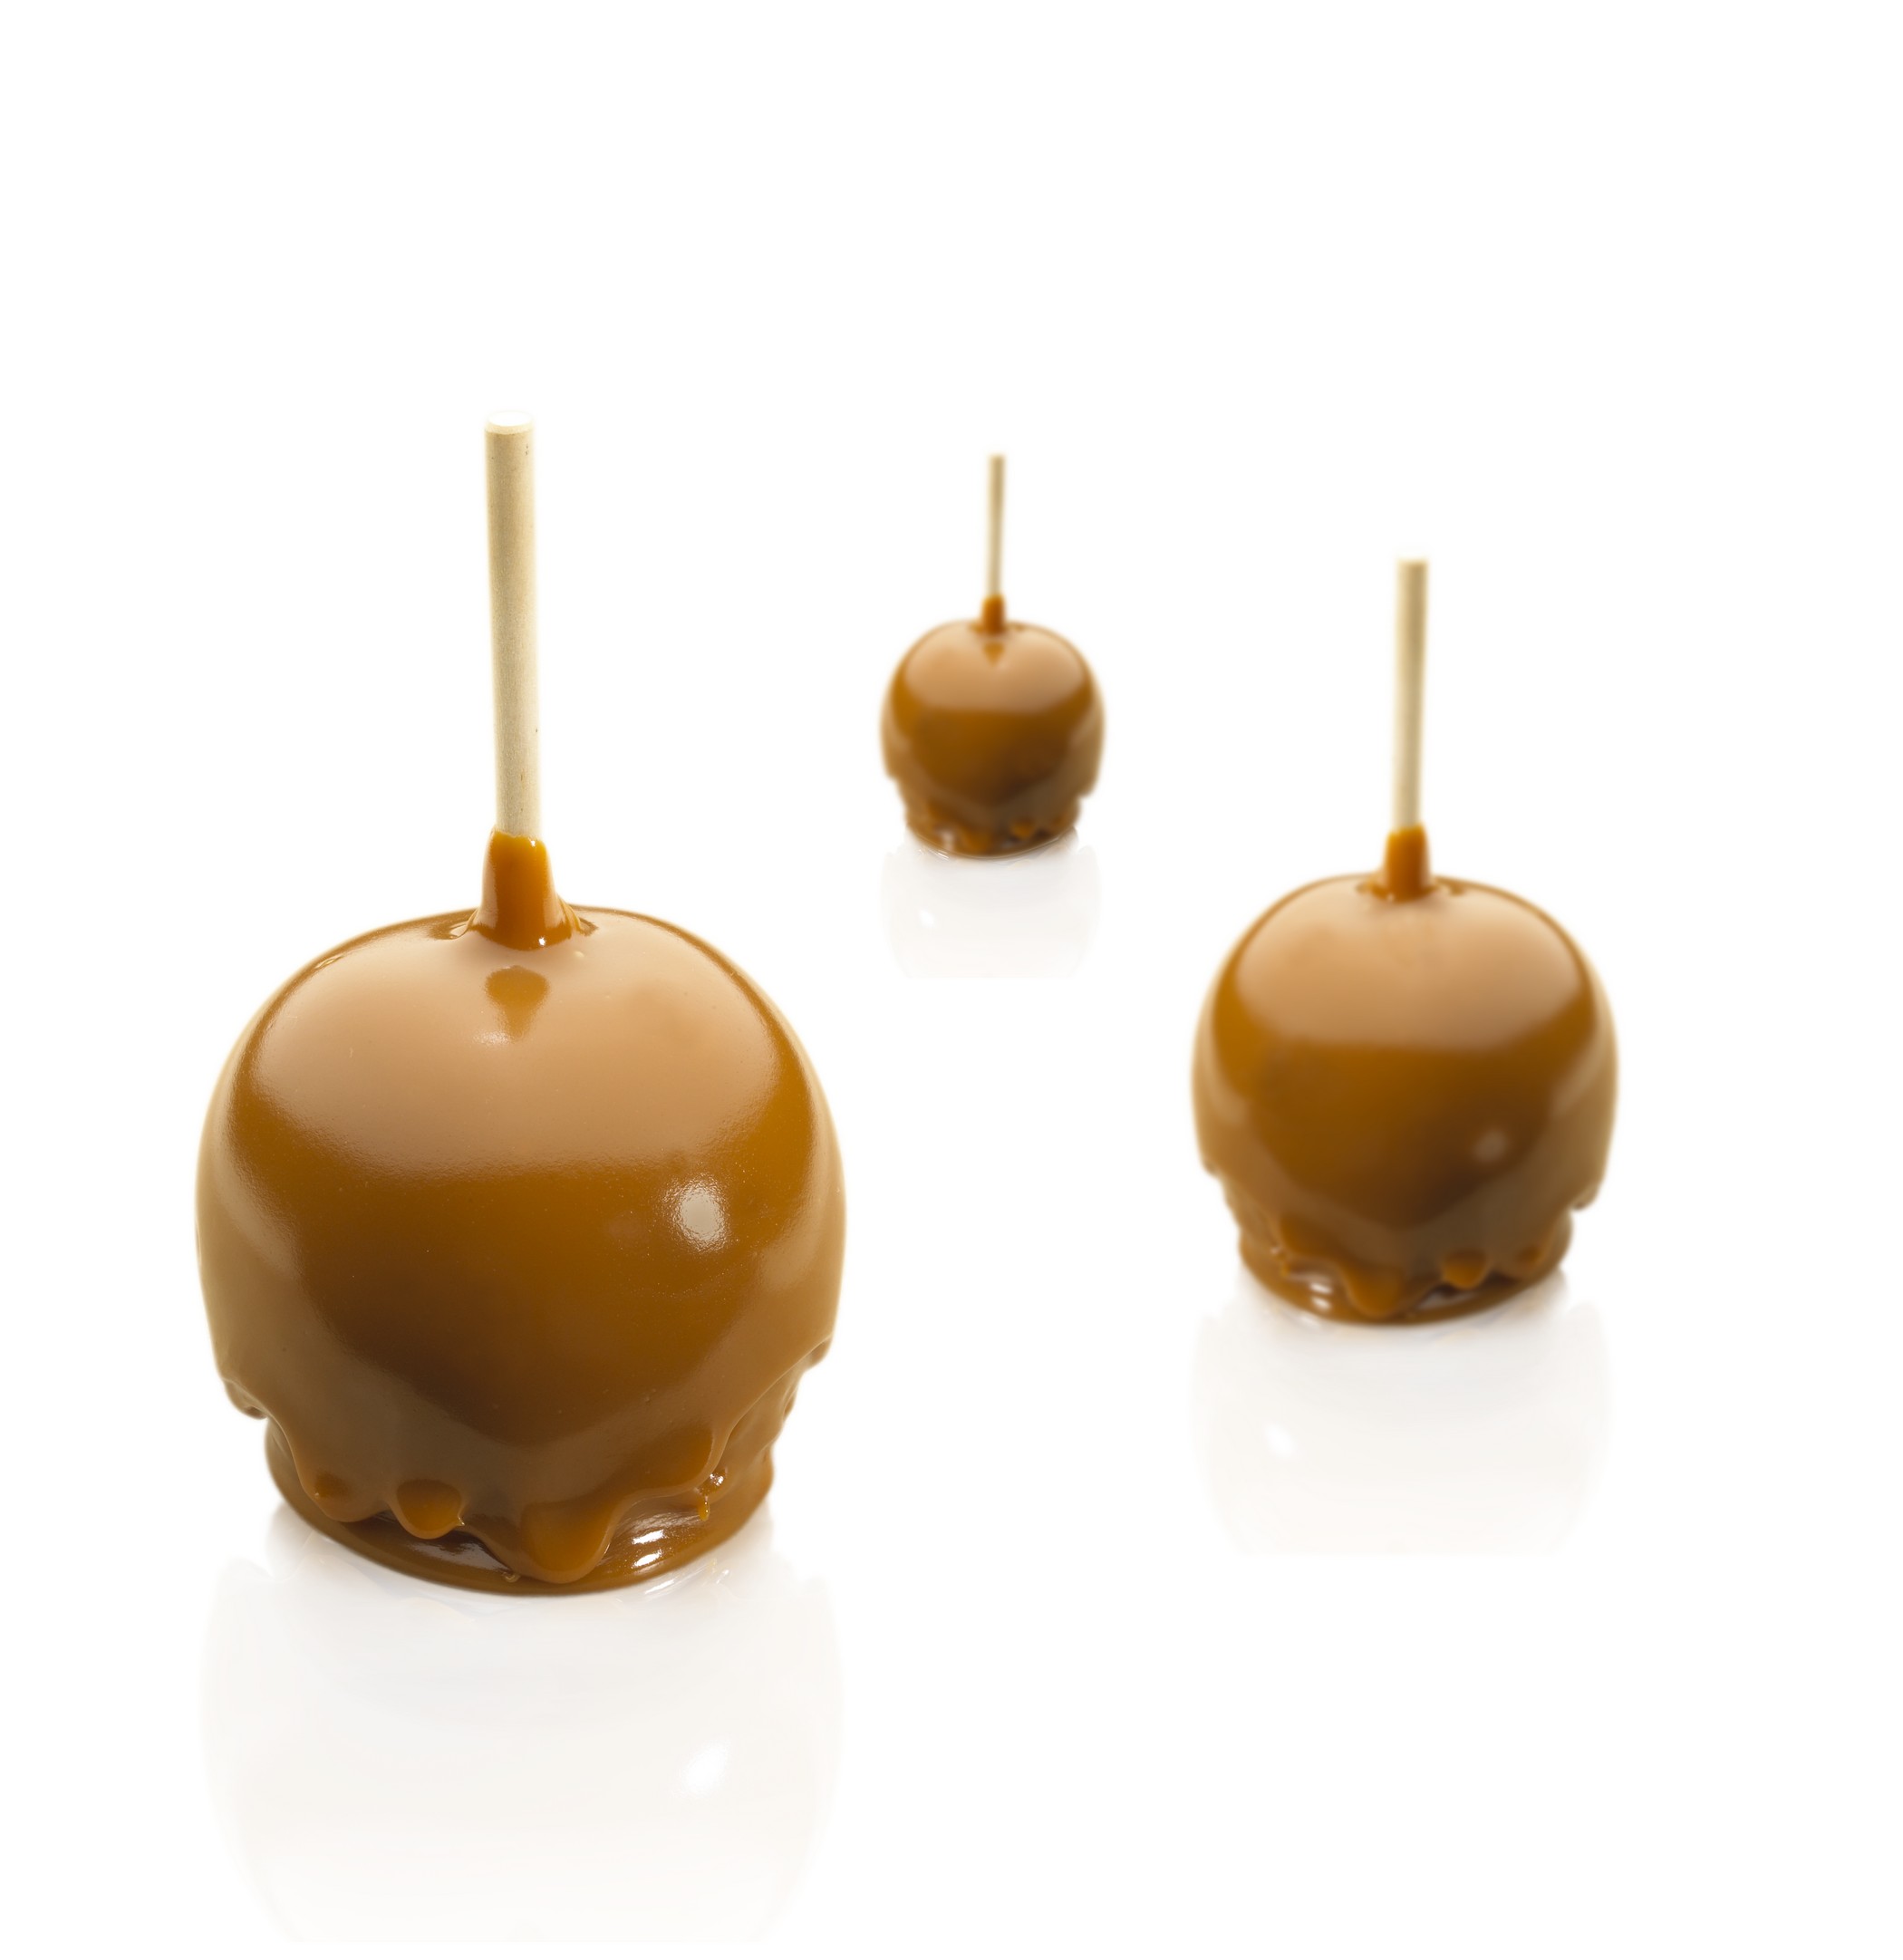 Abdallah Candies Infamous Caramel Apples Now Available Through October 